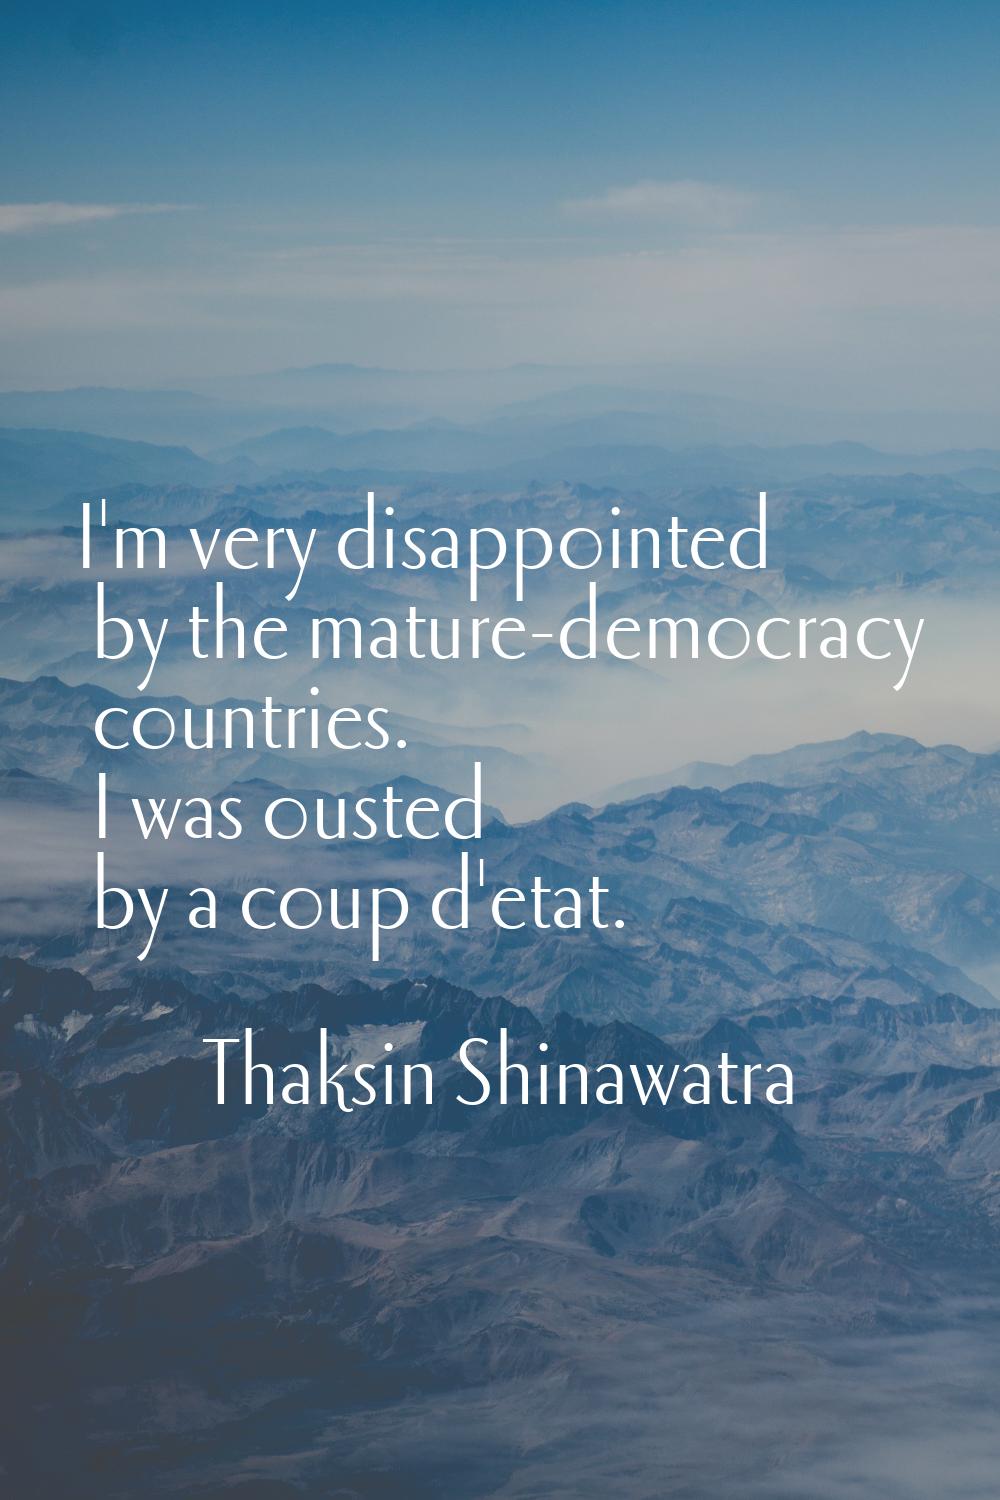 I'm very disappointed by the mature-democracy countries. I was ousted by a coup d'etat.